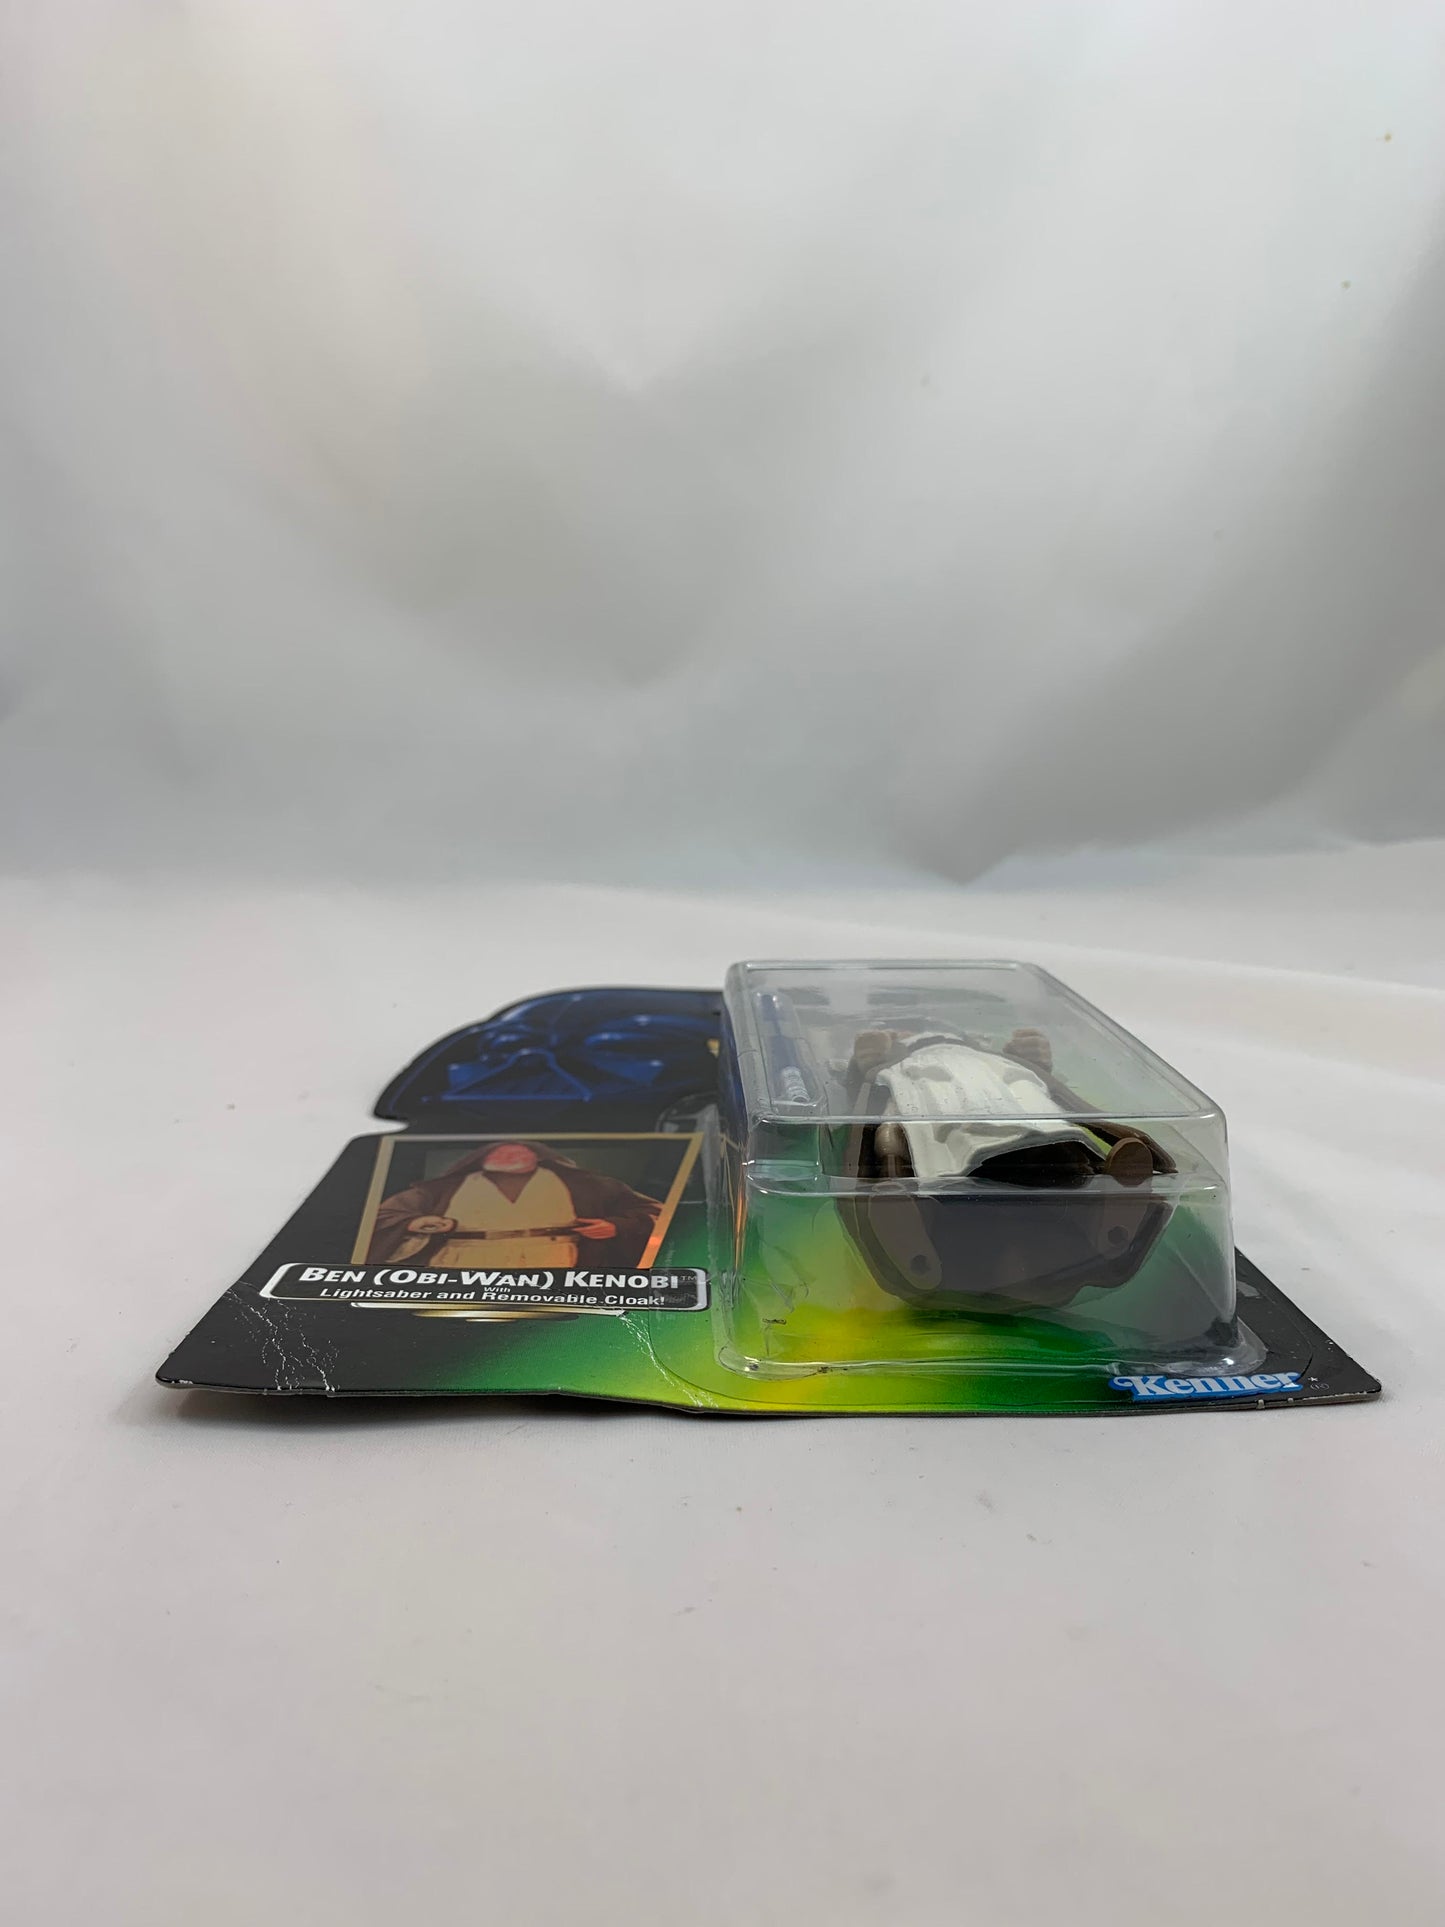 Kenner Hasbro Star Wars Power Of The Force 2 Green Card HOLOGRAM Ben (Obi Wan) Kenobi with Lightsaber and Removable Cape - MOC